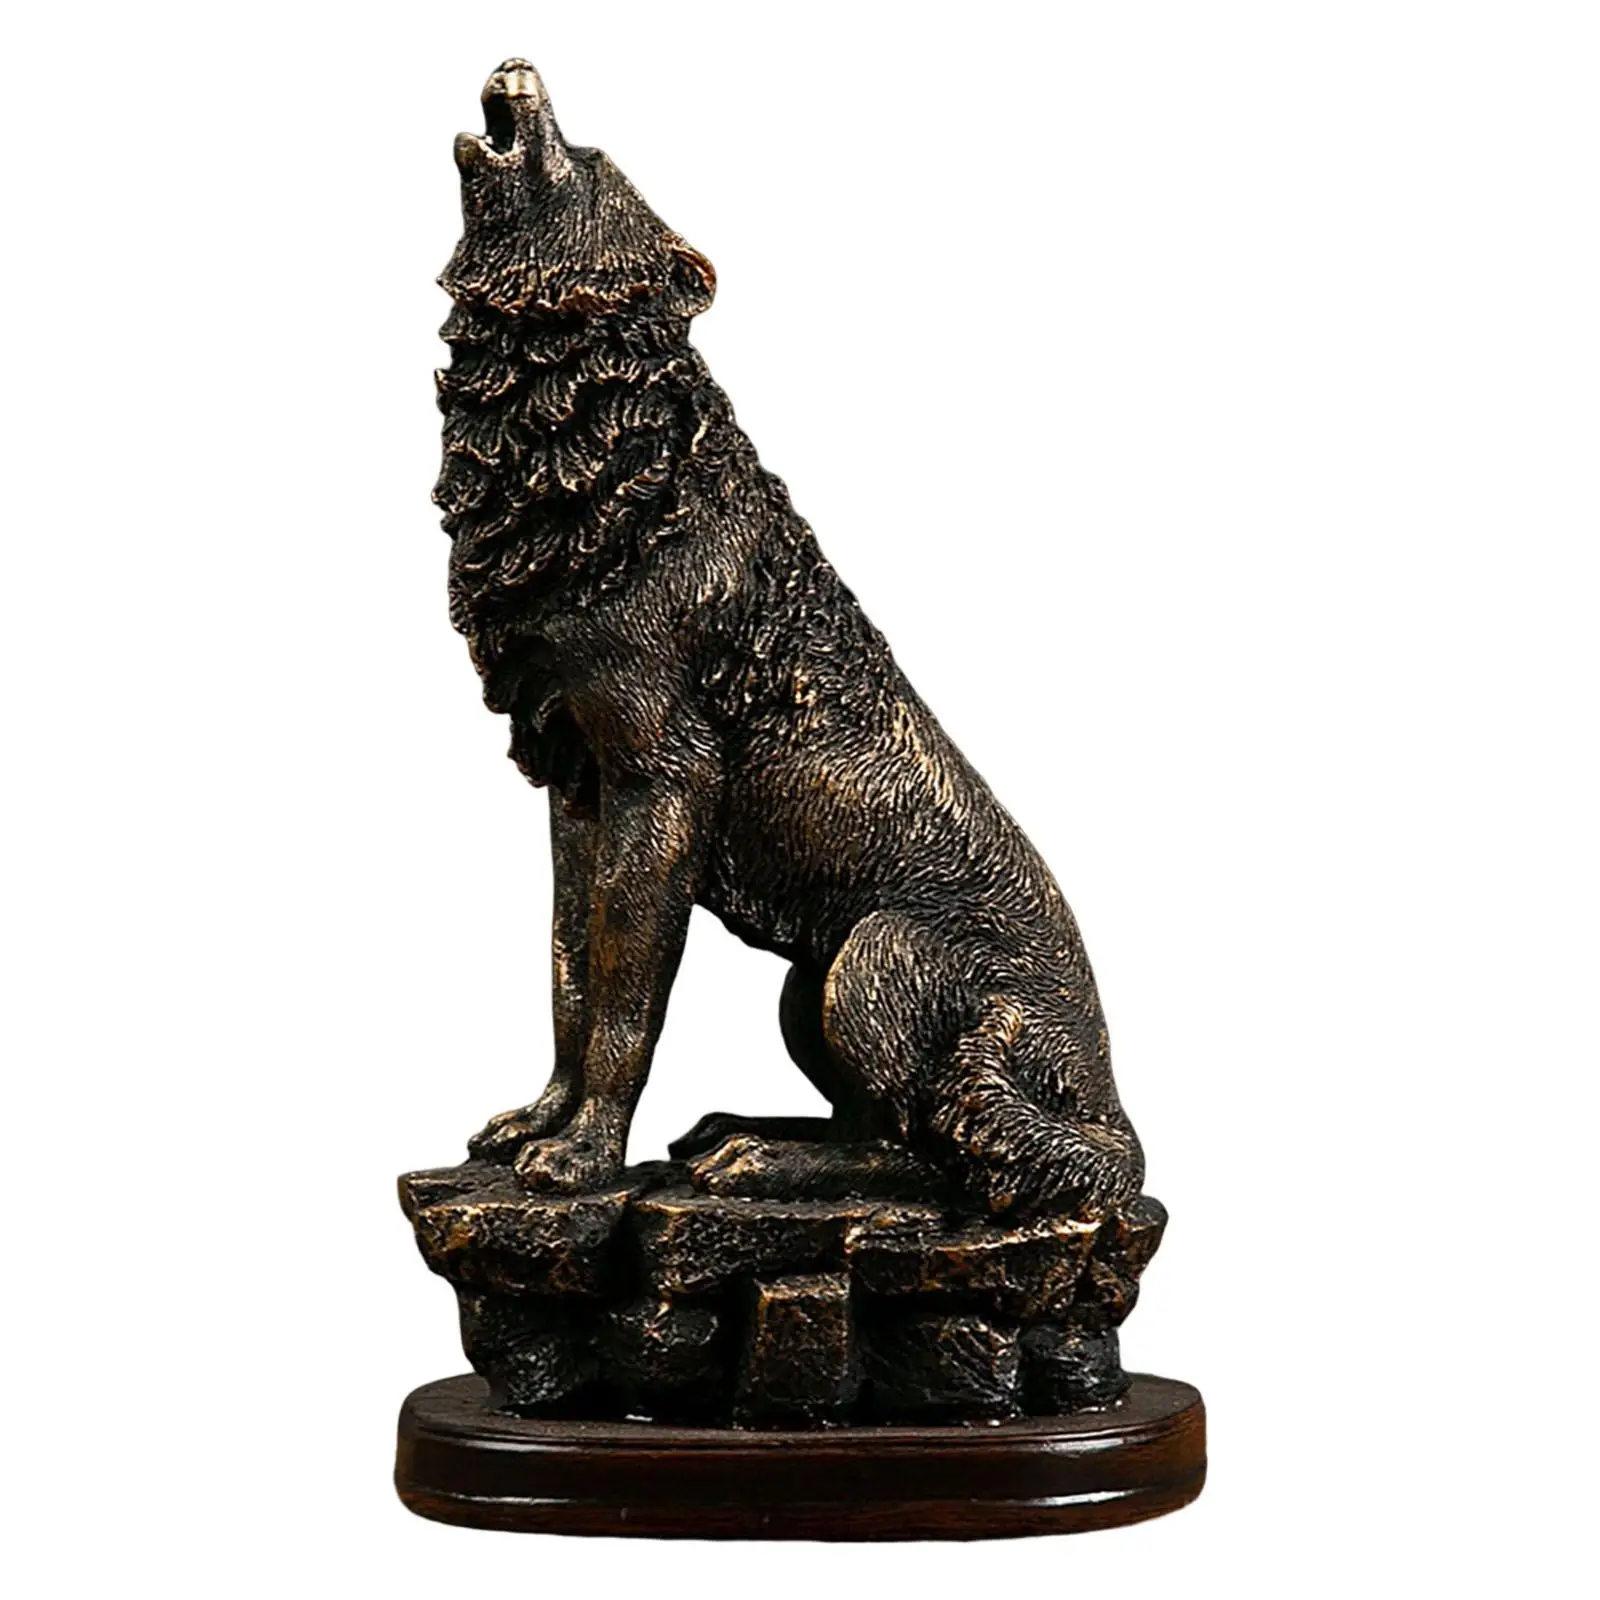 Wolf Figurine Ornament Tabletop Resin Sculpture for Party Gift